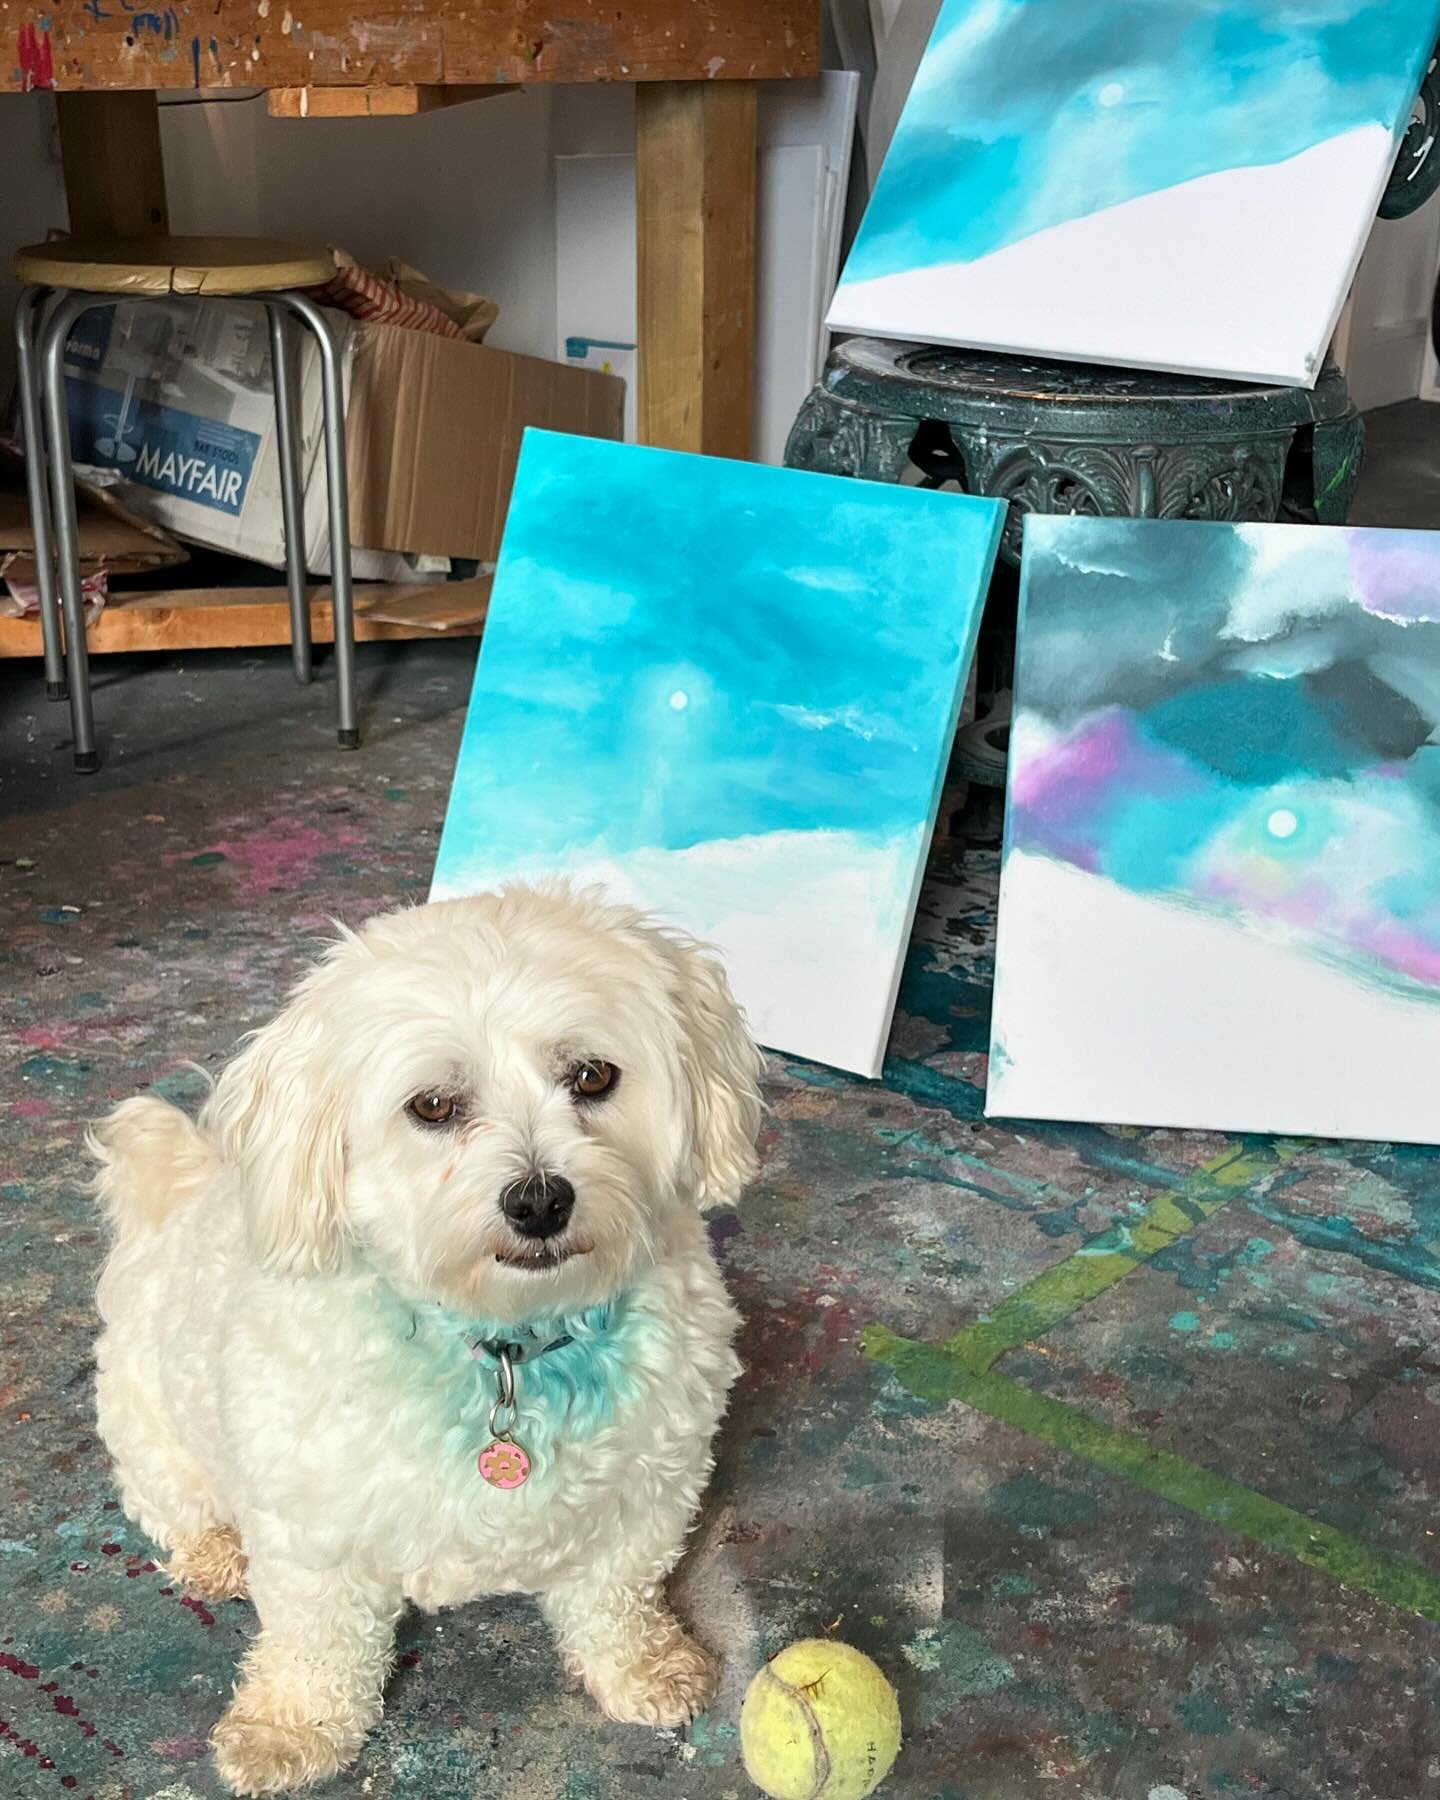 This blue beard on Coco is completely my fault, she never goes near my things in the studio but I am so messy I get paint on everything &amp; I got this on her from my hands 🙈 but of course she forgives all❤️
.
.
.
.
#irishart #irishartist #irishart